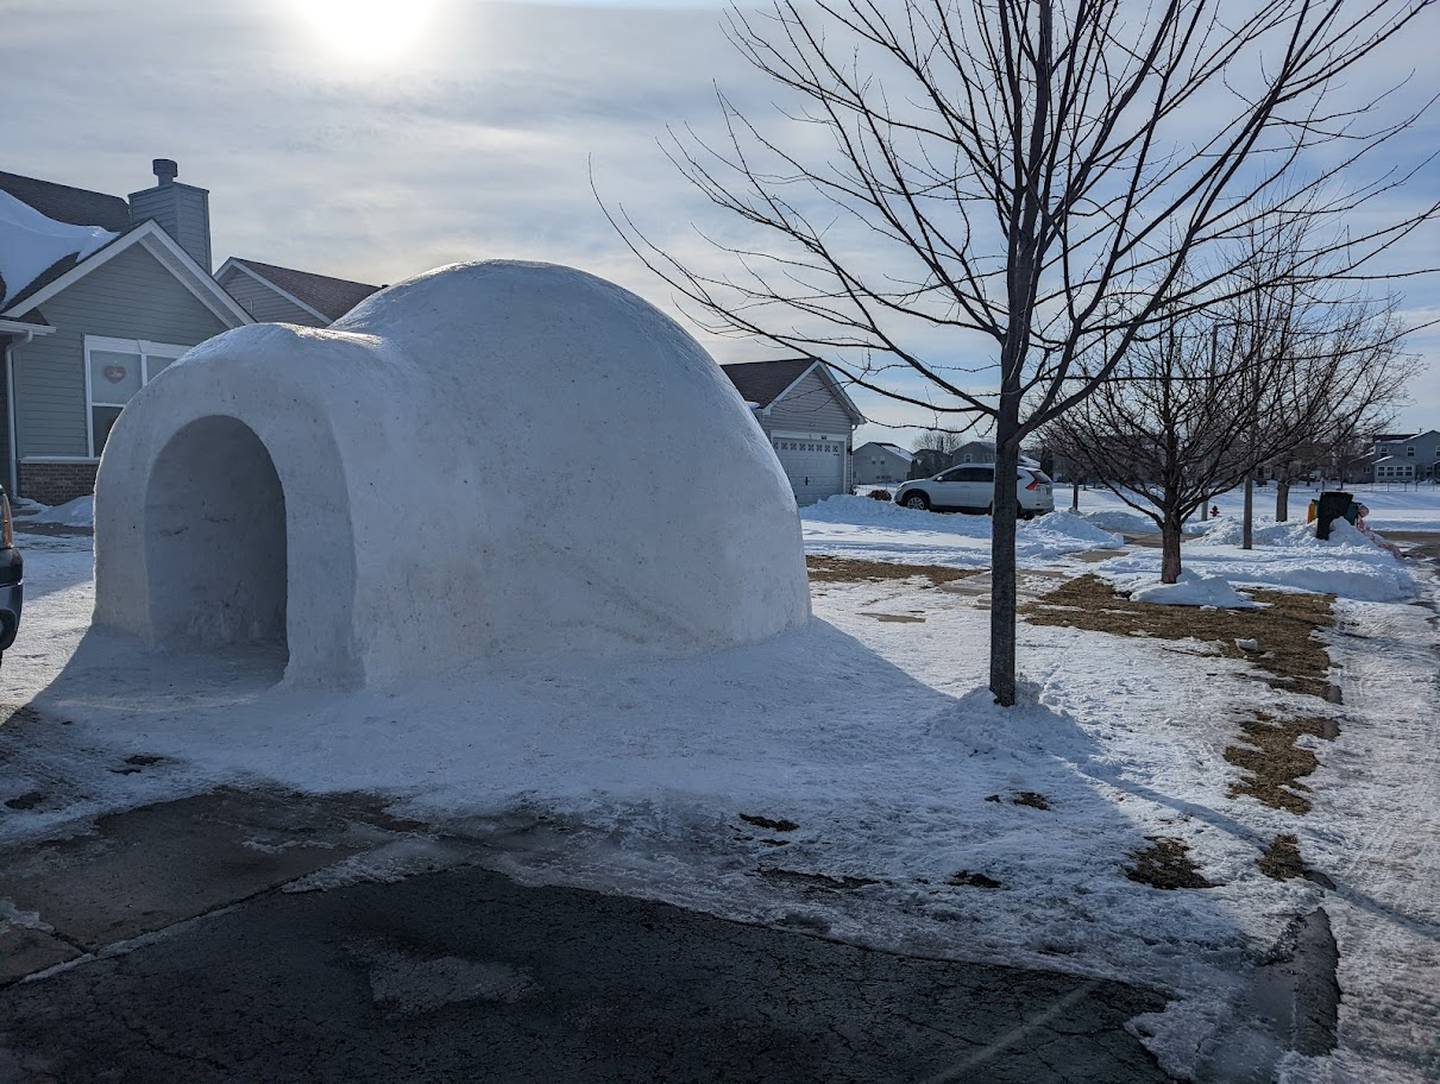 For the last five years, Lee Peters of Plainfield has built an igloo in the yard of his home. He used to build them with his father and sister when growing up and wanted to pass the skill to his own children.